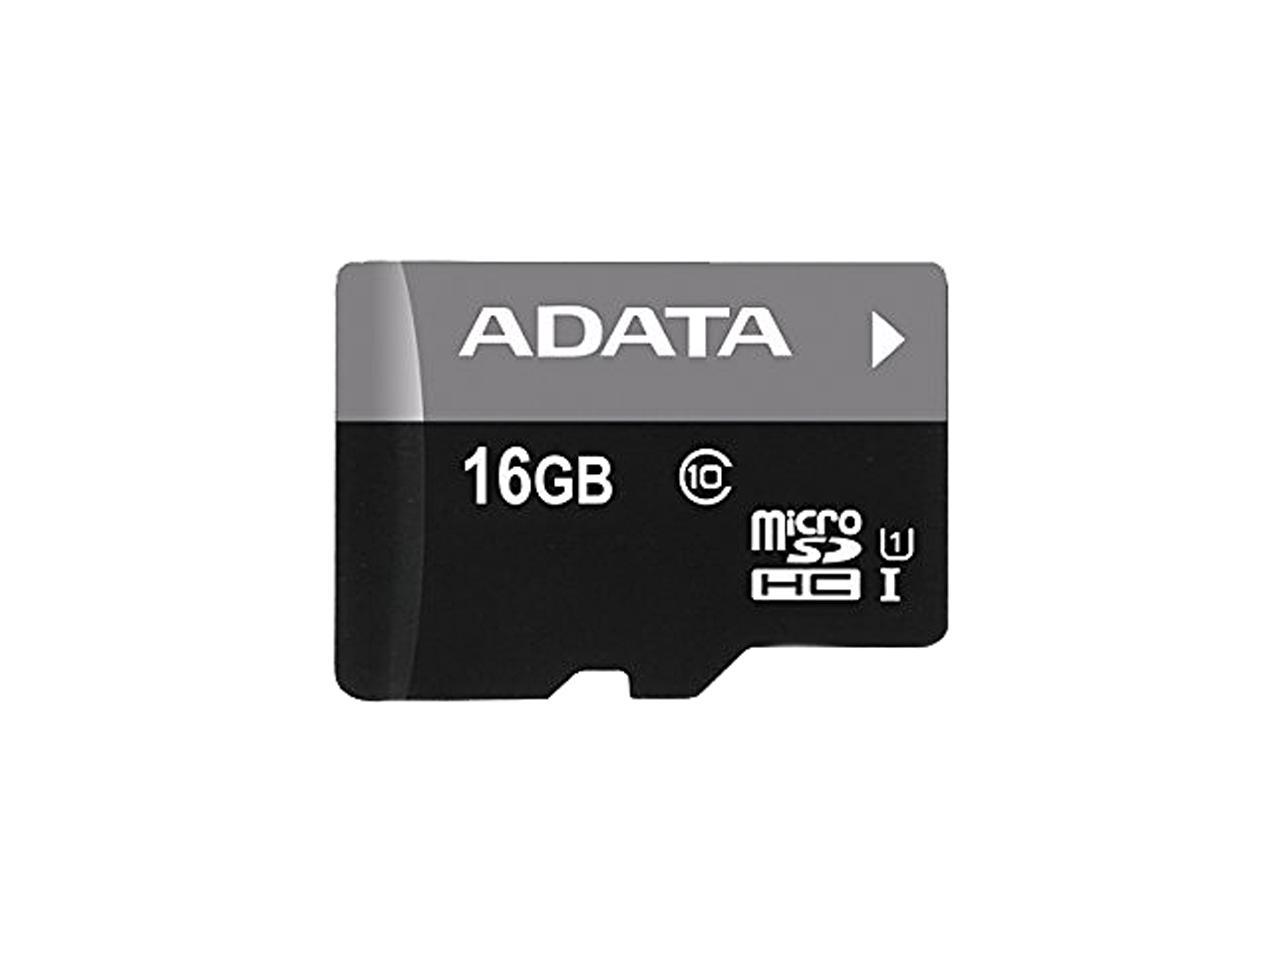 ADATA 16GB Premier microSDHC UHS-I / Class 10 Memory Card with SD Adapter, Speed Up to 50MB/s (AUSDH16GUICL10-RA1)